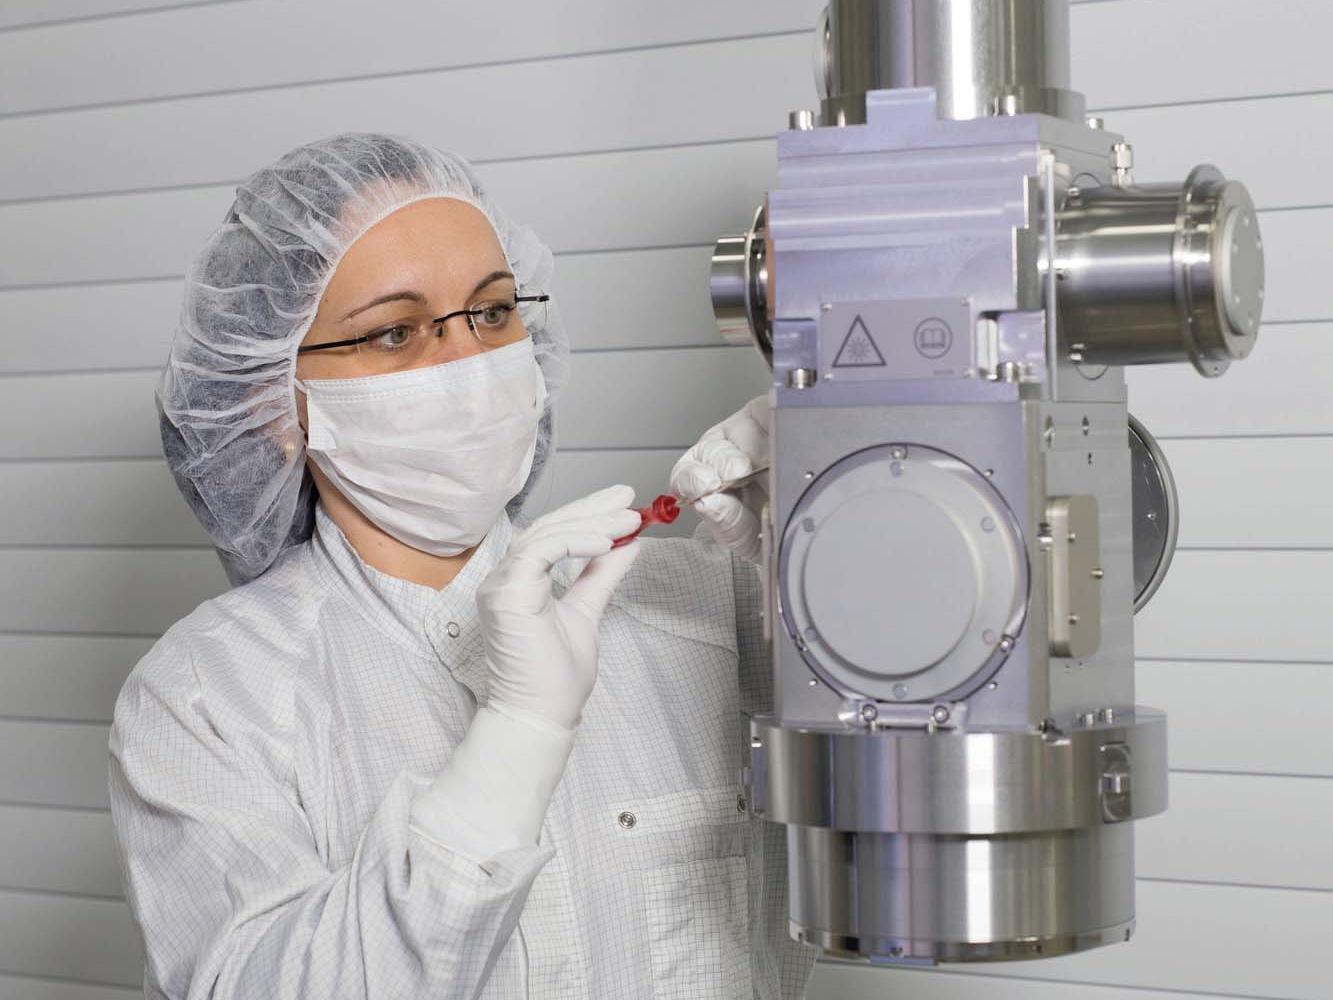 ZEISS SMT employee works on optics systems